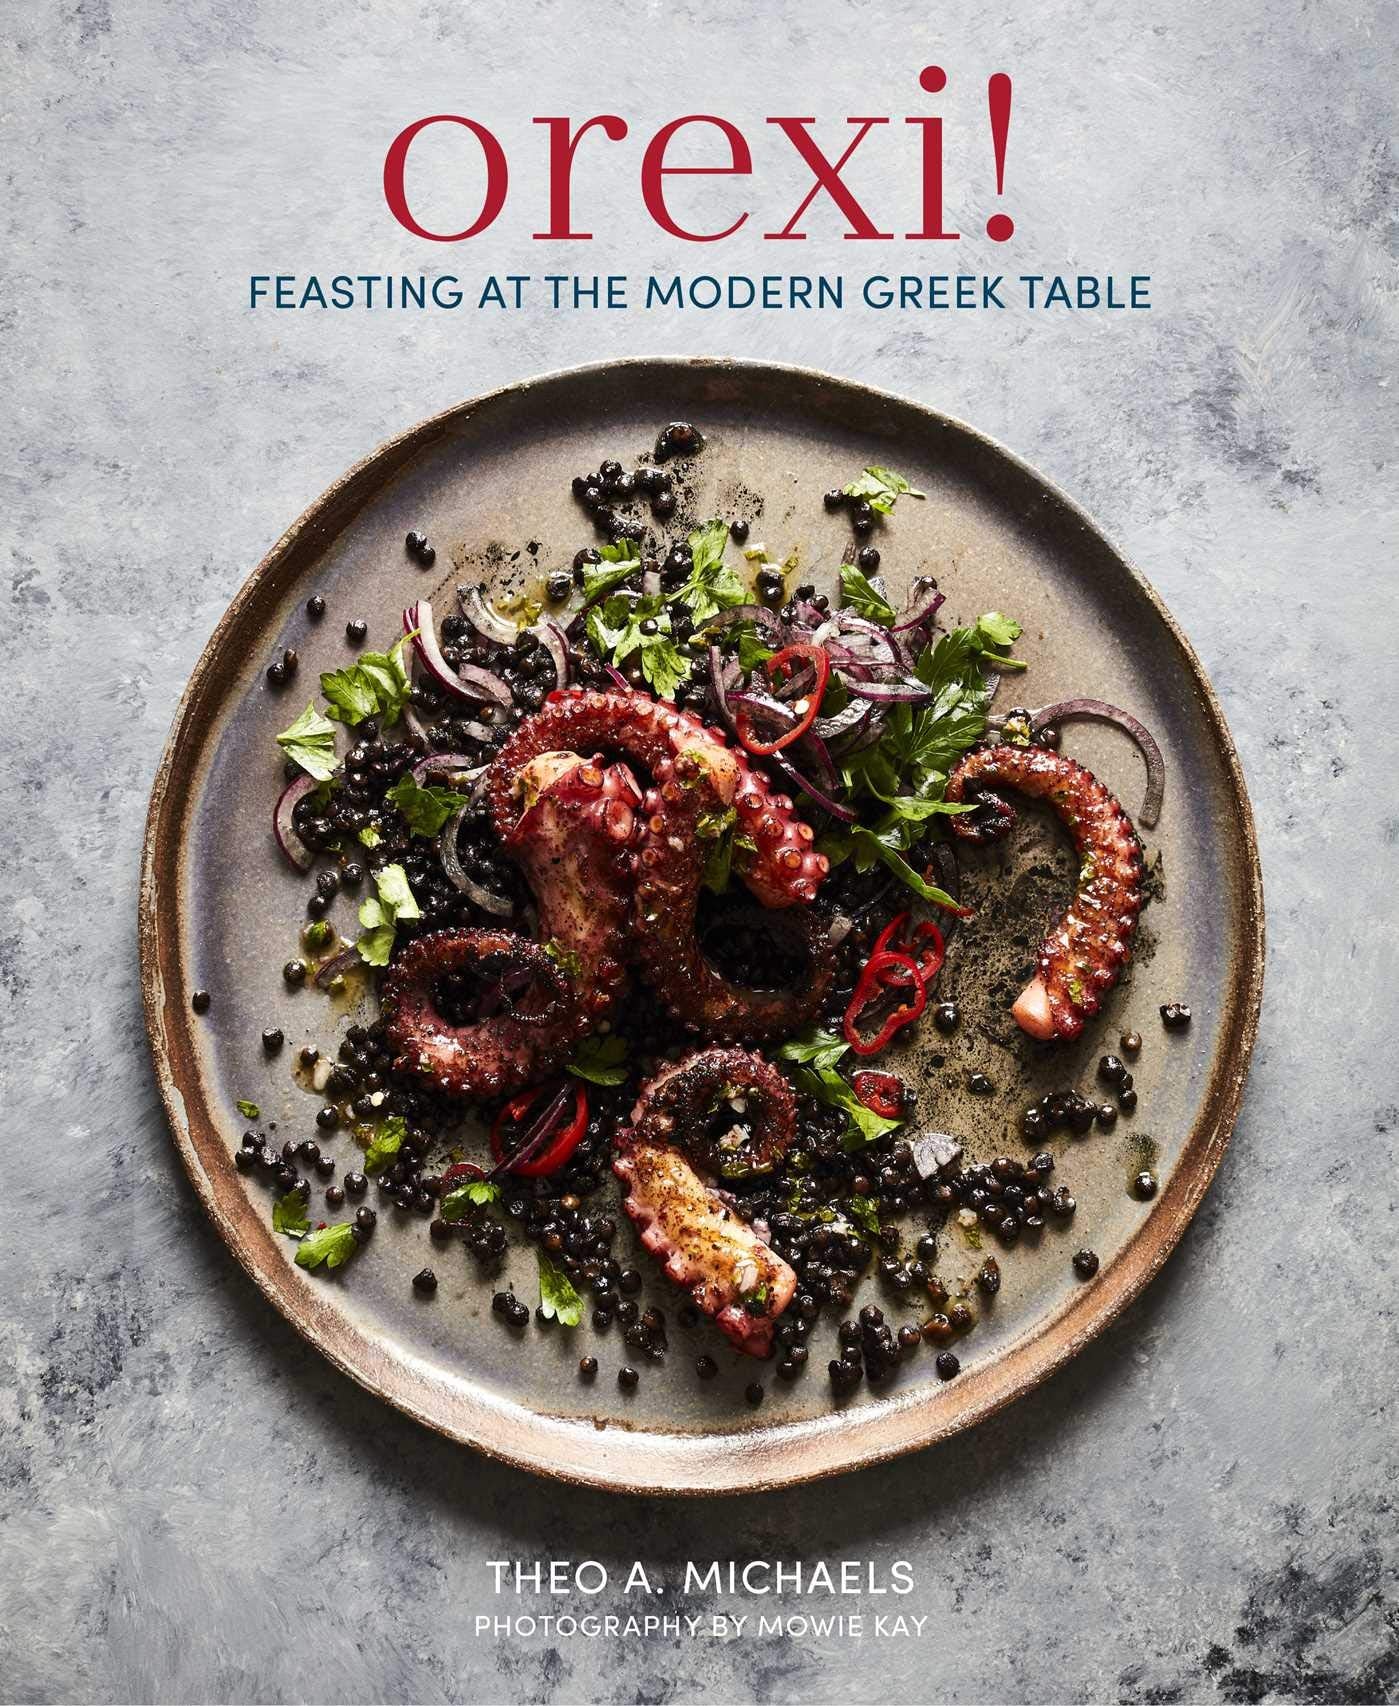 Orexi!: Feasting at the modern Greek table (Theo A. Michaels)